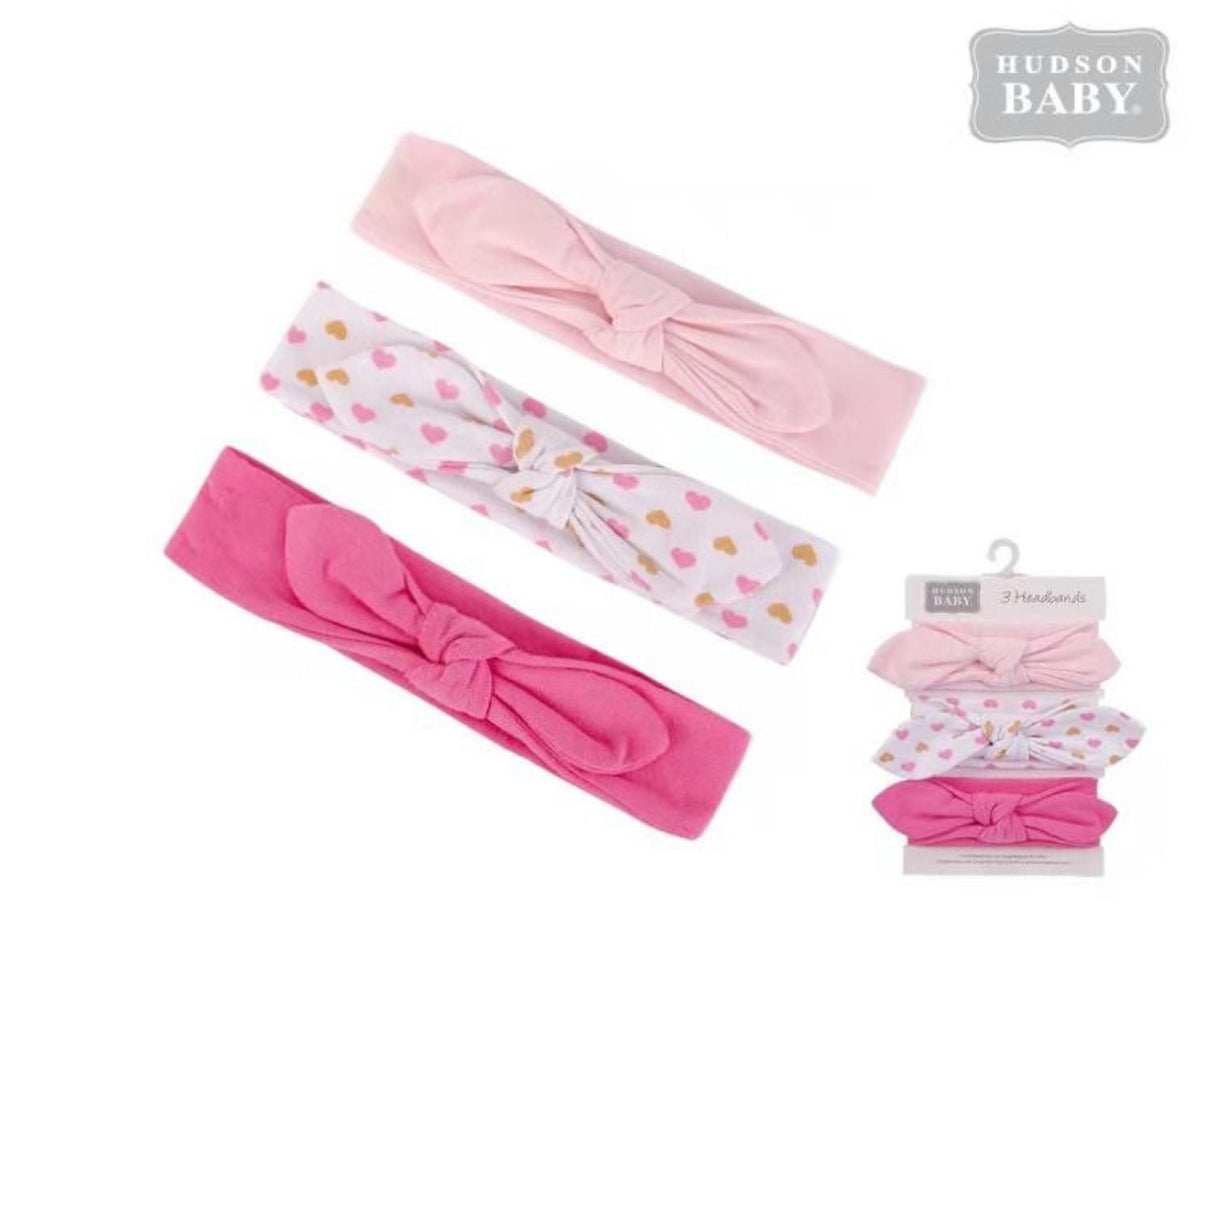 Hudson Baby Stretchable Knotted Cotton Headband